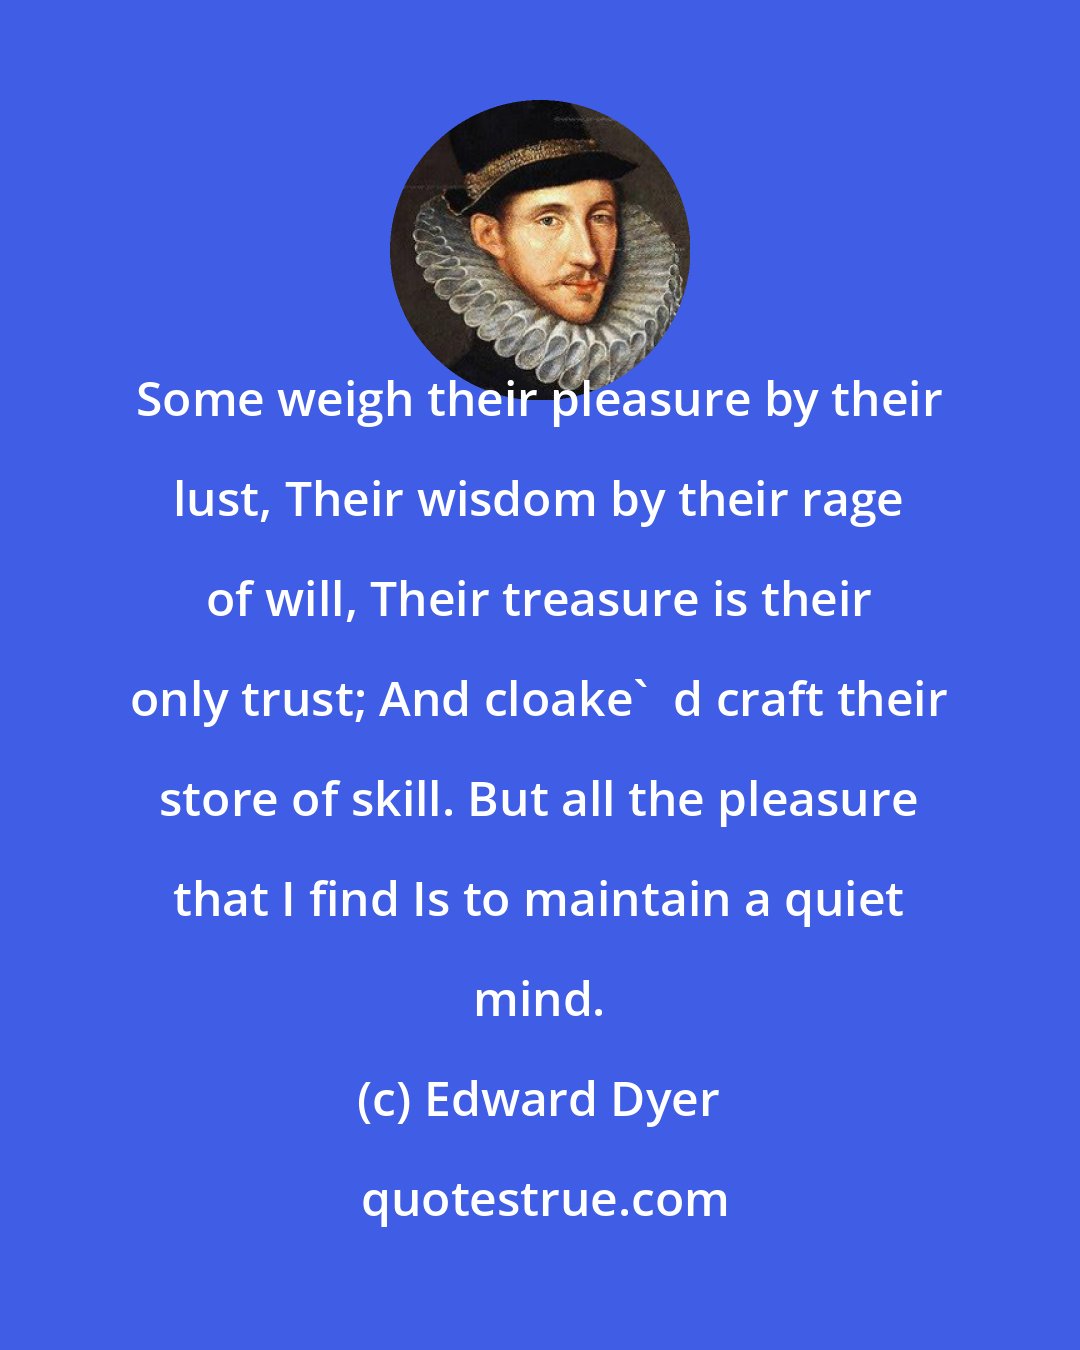 Edward Dyer: Some weigh their pleasure by their lust, Their wisdom by their rage of will, Their treasure is their only trust; And cloake'  d craft their store of skill. But all the pleasure that I find Is to maintain a quiet mind.